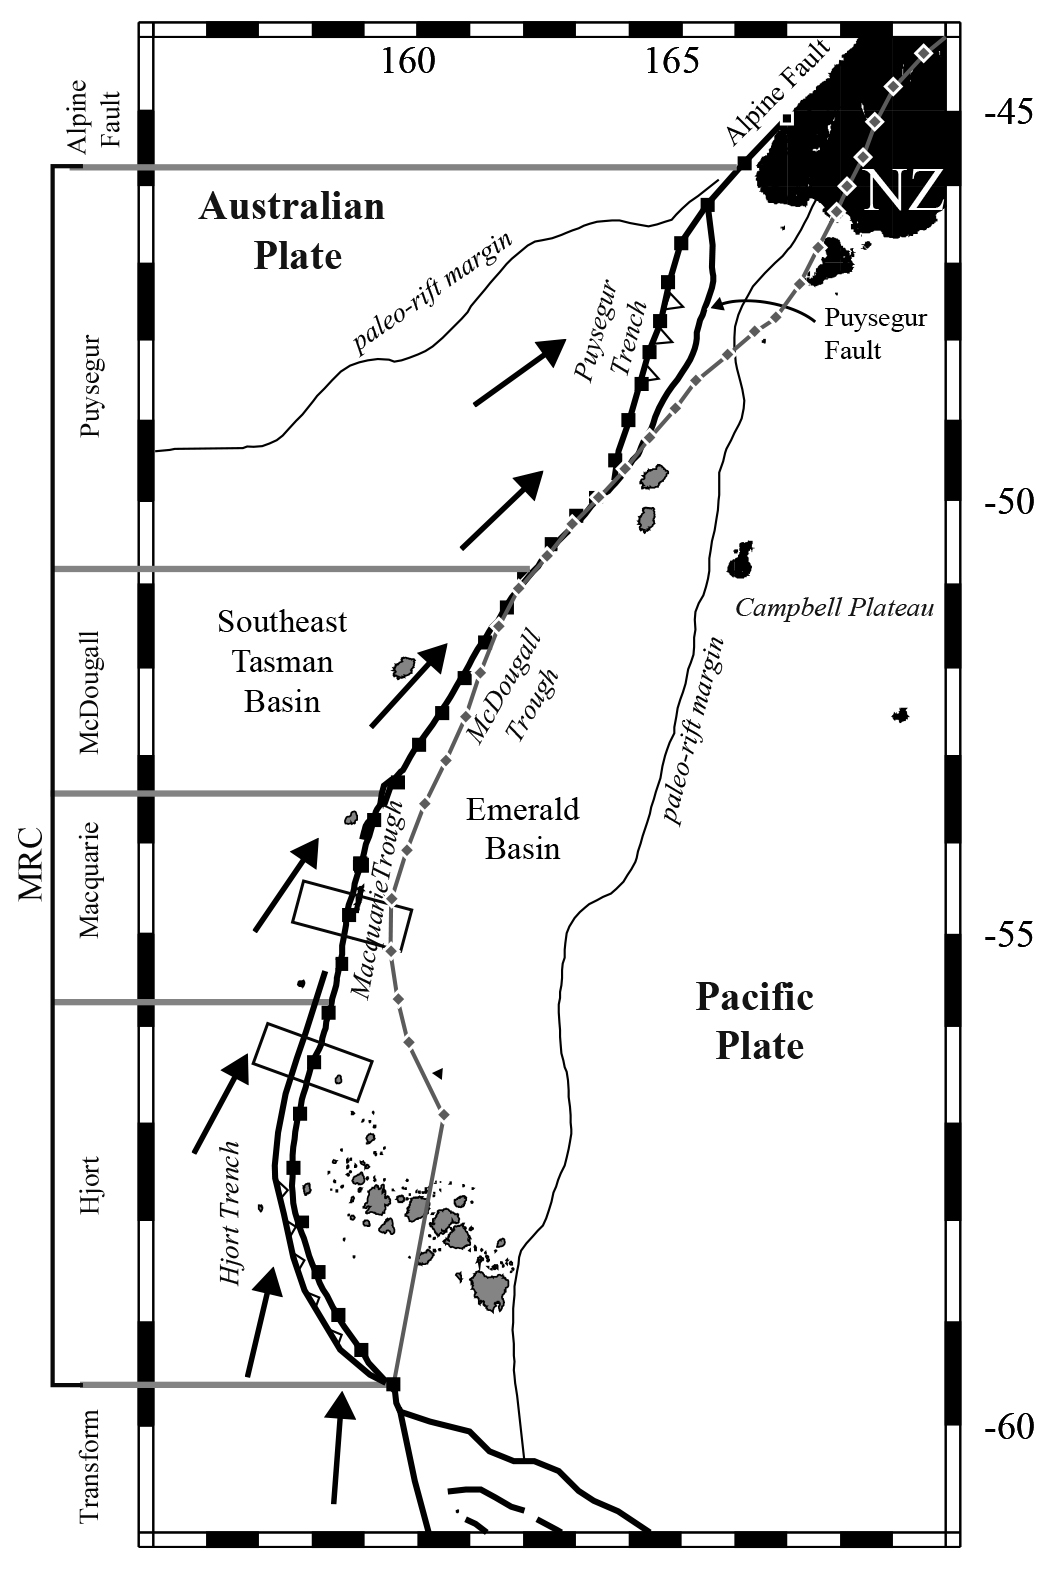 Physiography of the Macquarie Ridge Complex